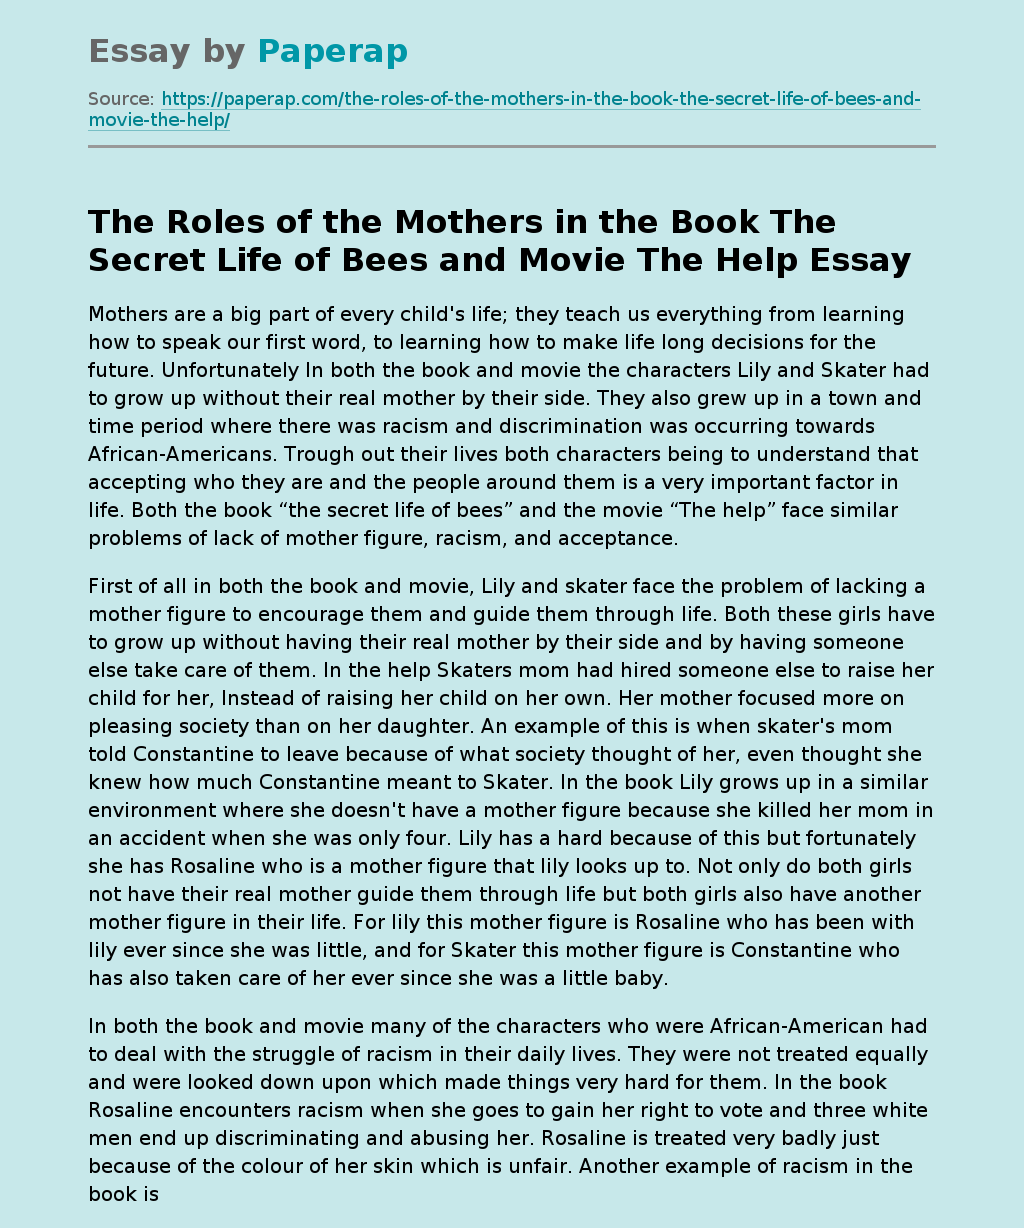 The Roles of the Mothers in the Book The Secret Life of Bees and Movie The Help